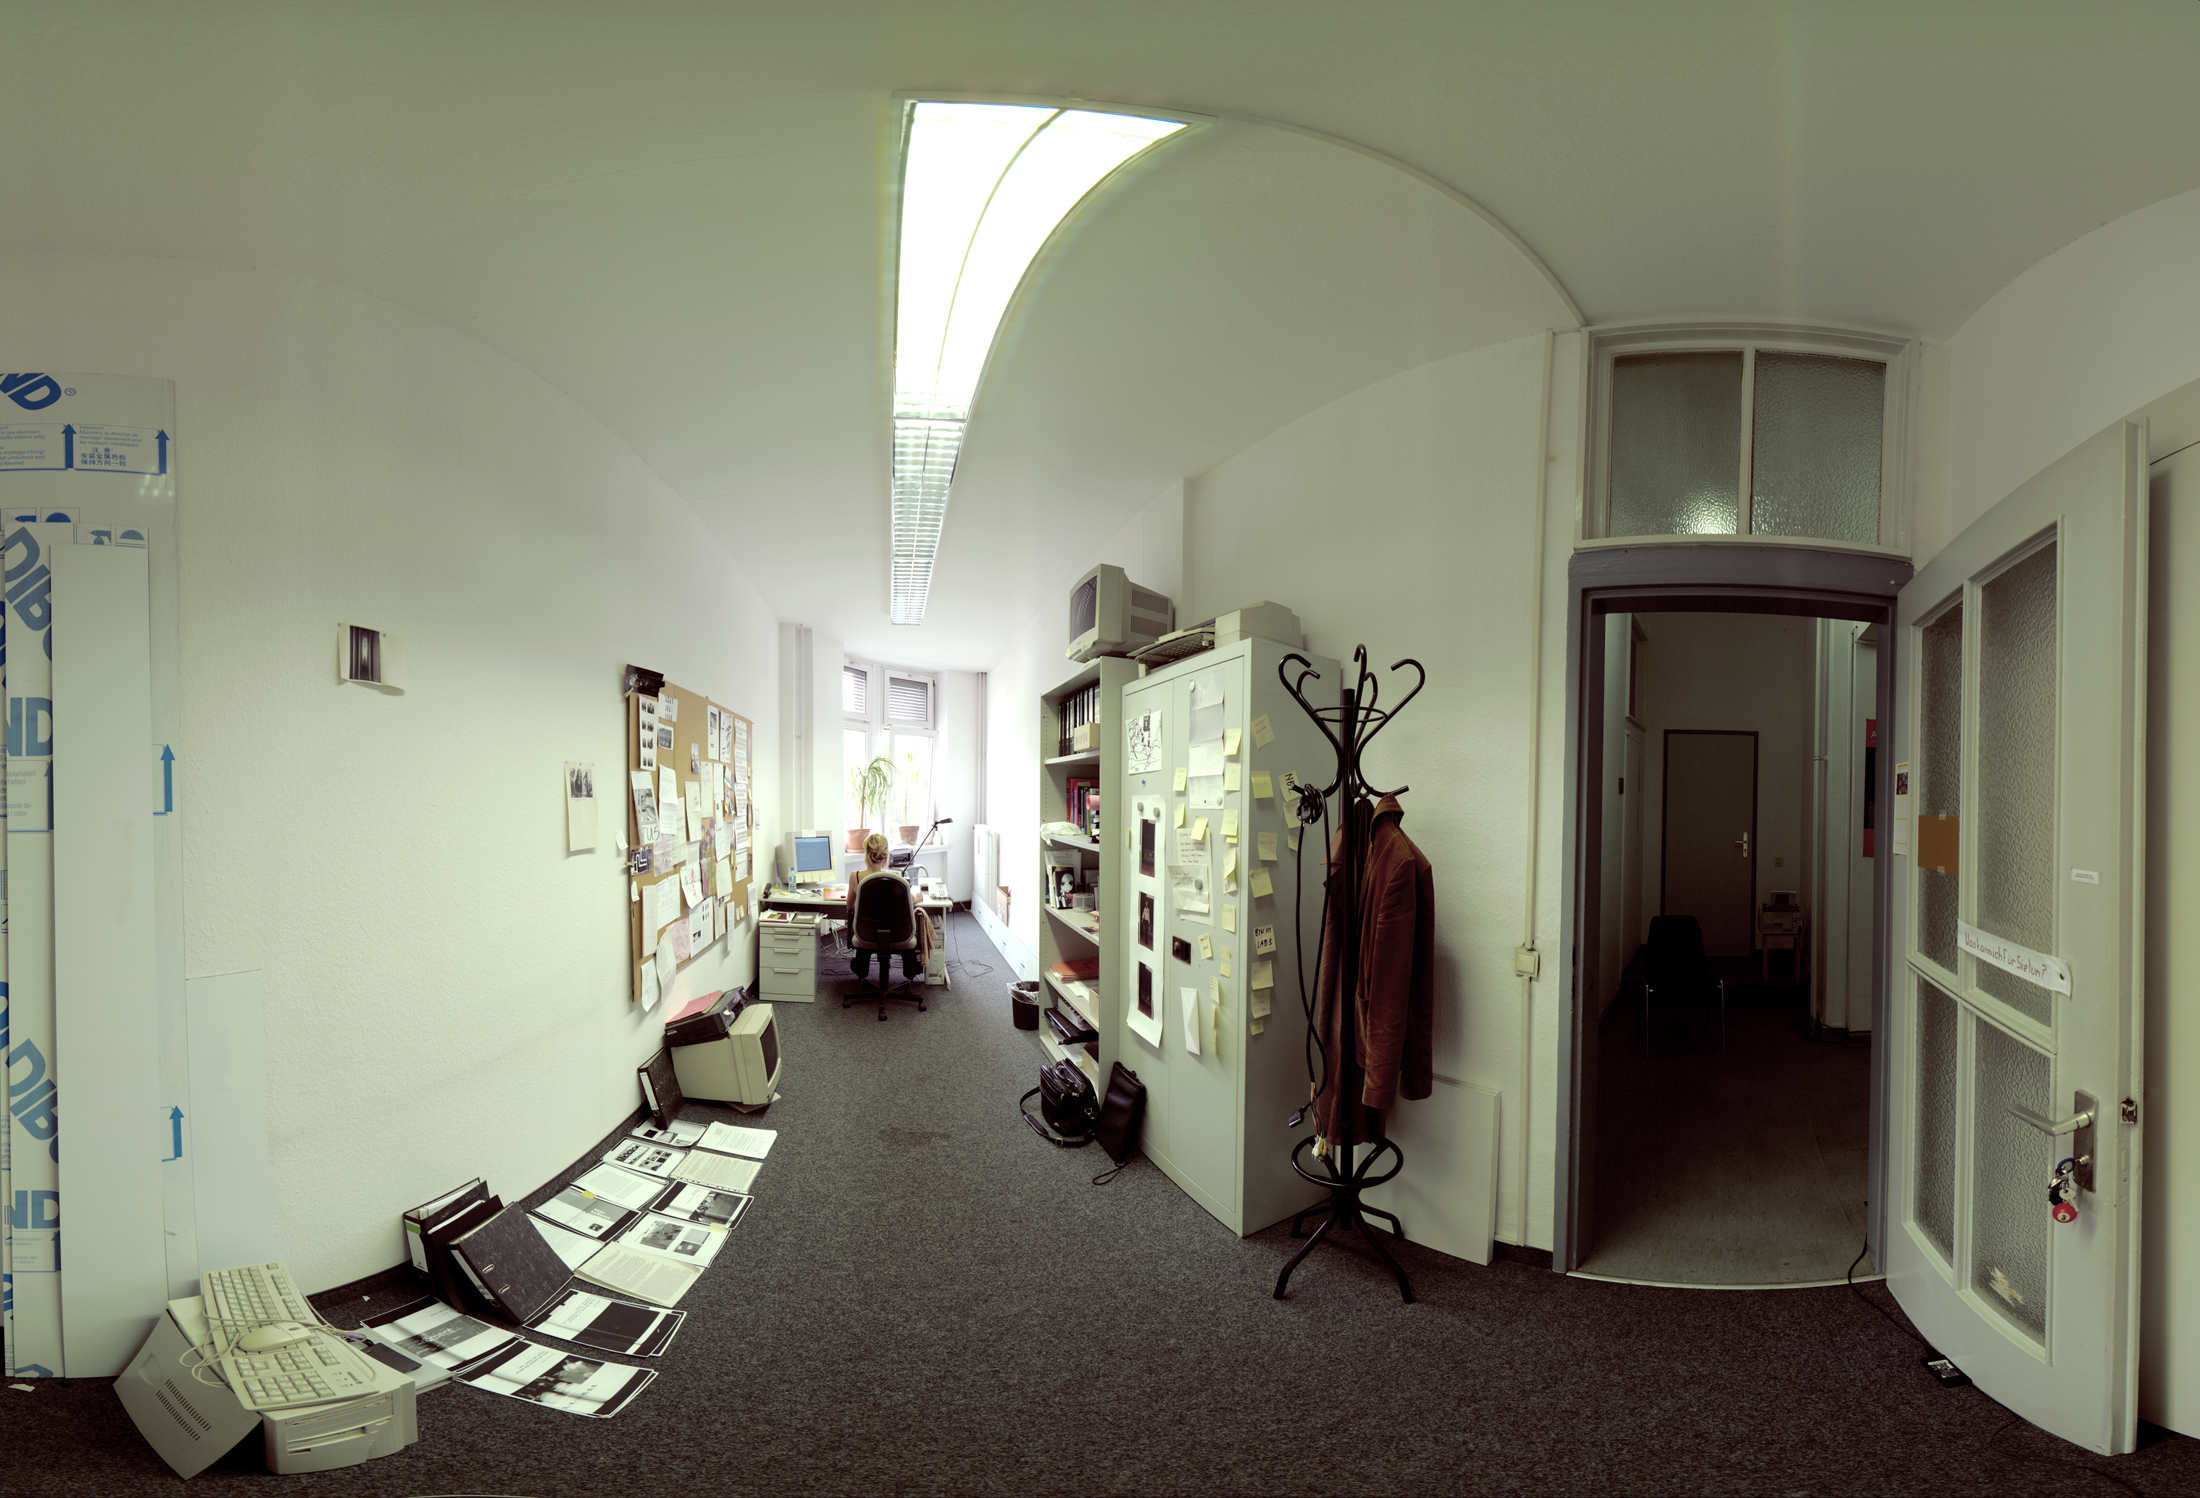 a wide angle view of the artist Susanna Schoenberg working in her office room